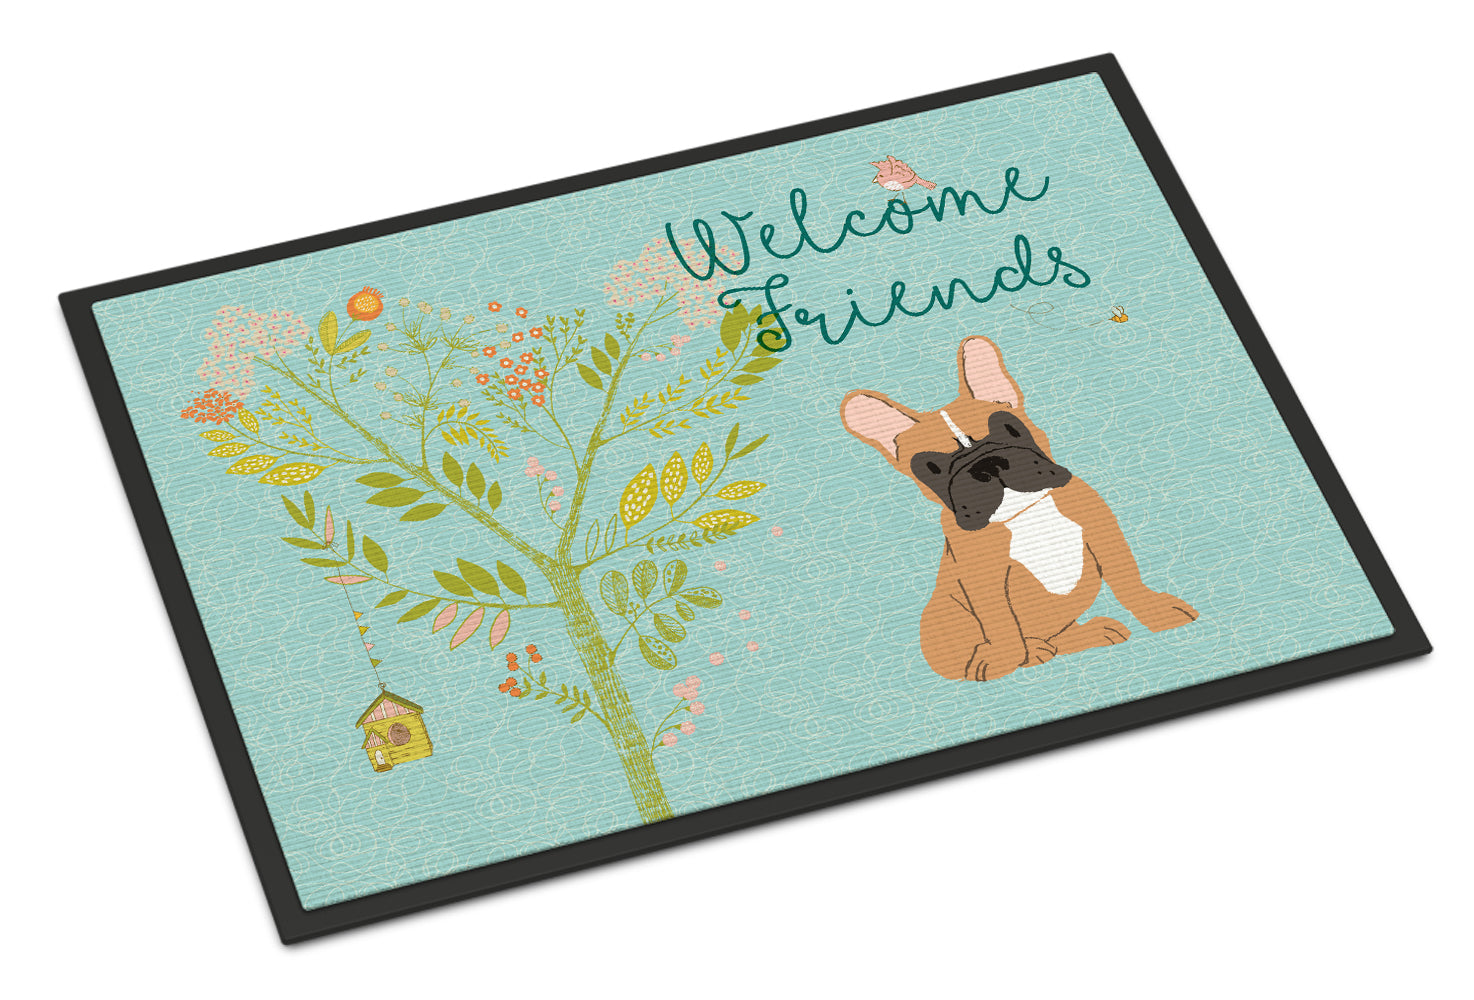 Welcome Friends Fawn French Bulldog Indoor or Outdoor Mat 18x27 BB7633MAT - the-store.com